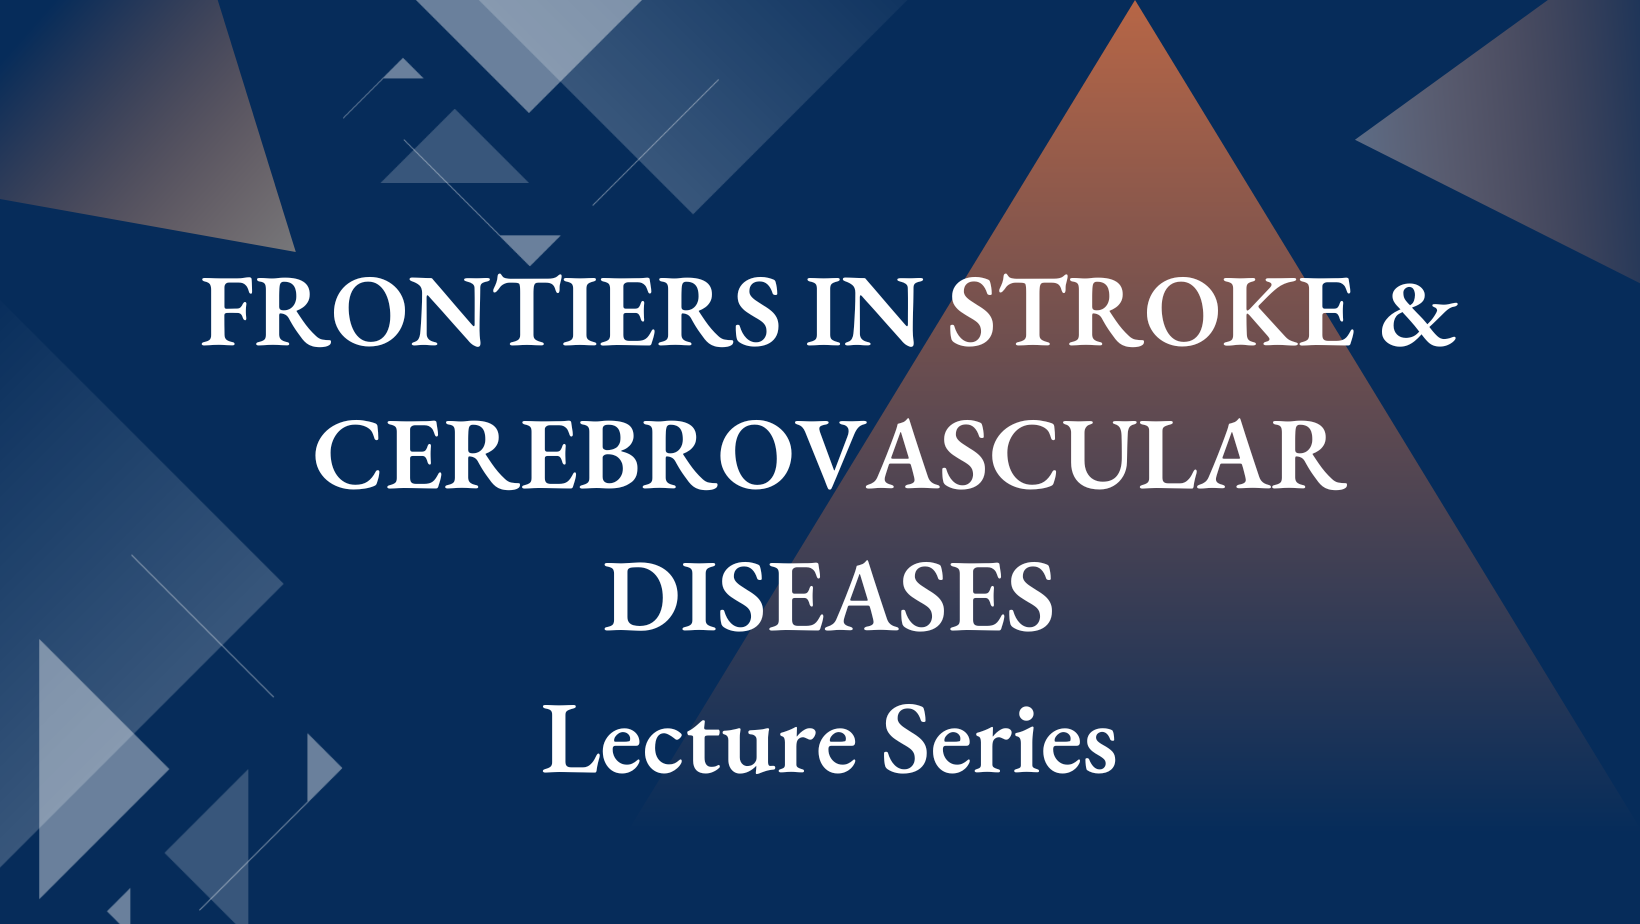 Frontiers in Stroke & Cerebrovascular Diseases Lecture Series